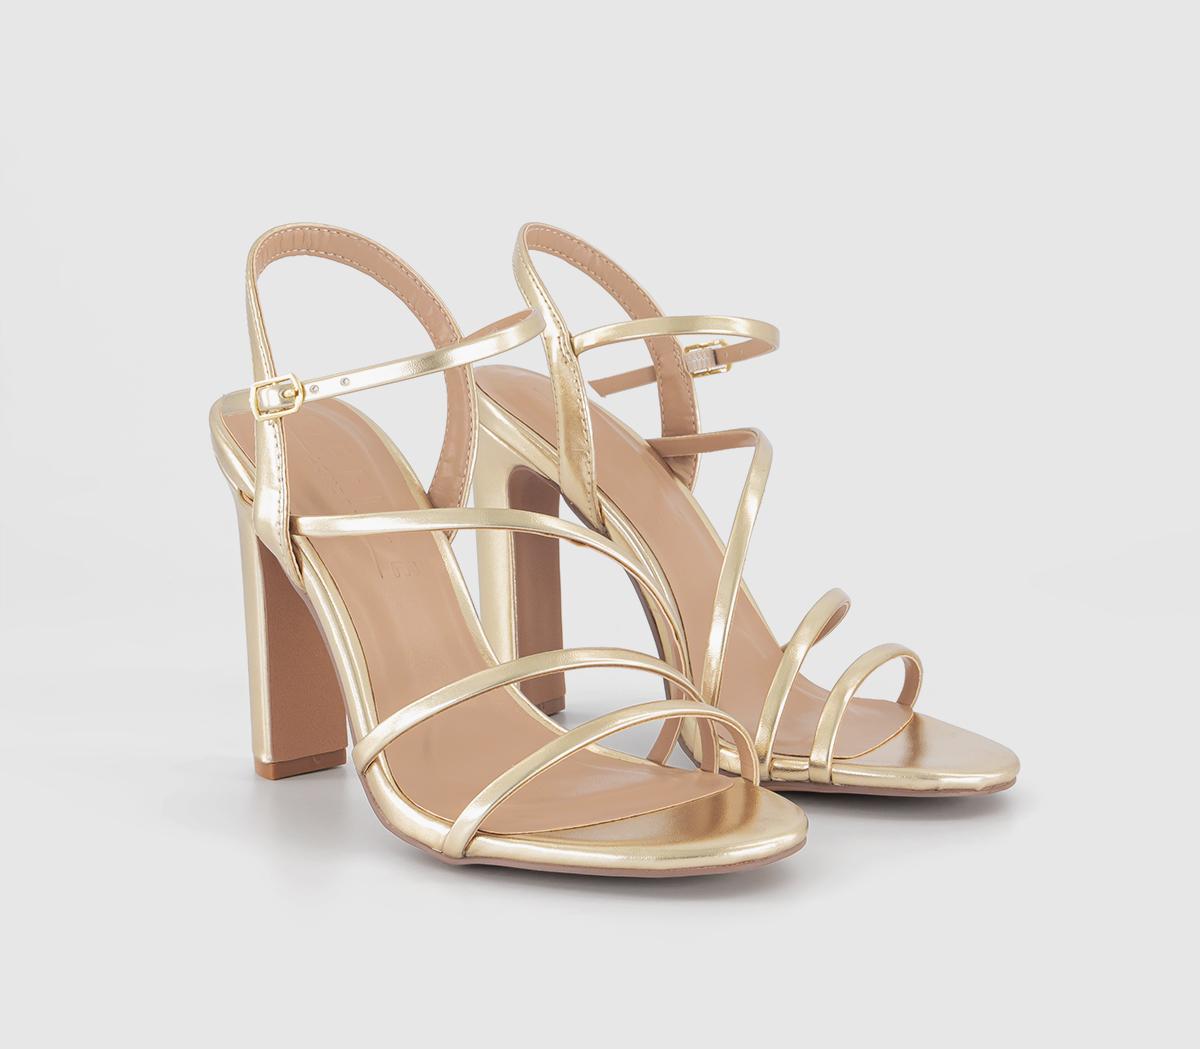 OFFICE Womens Hannah Strappy Heeled Sandal Gold, 5